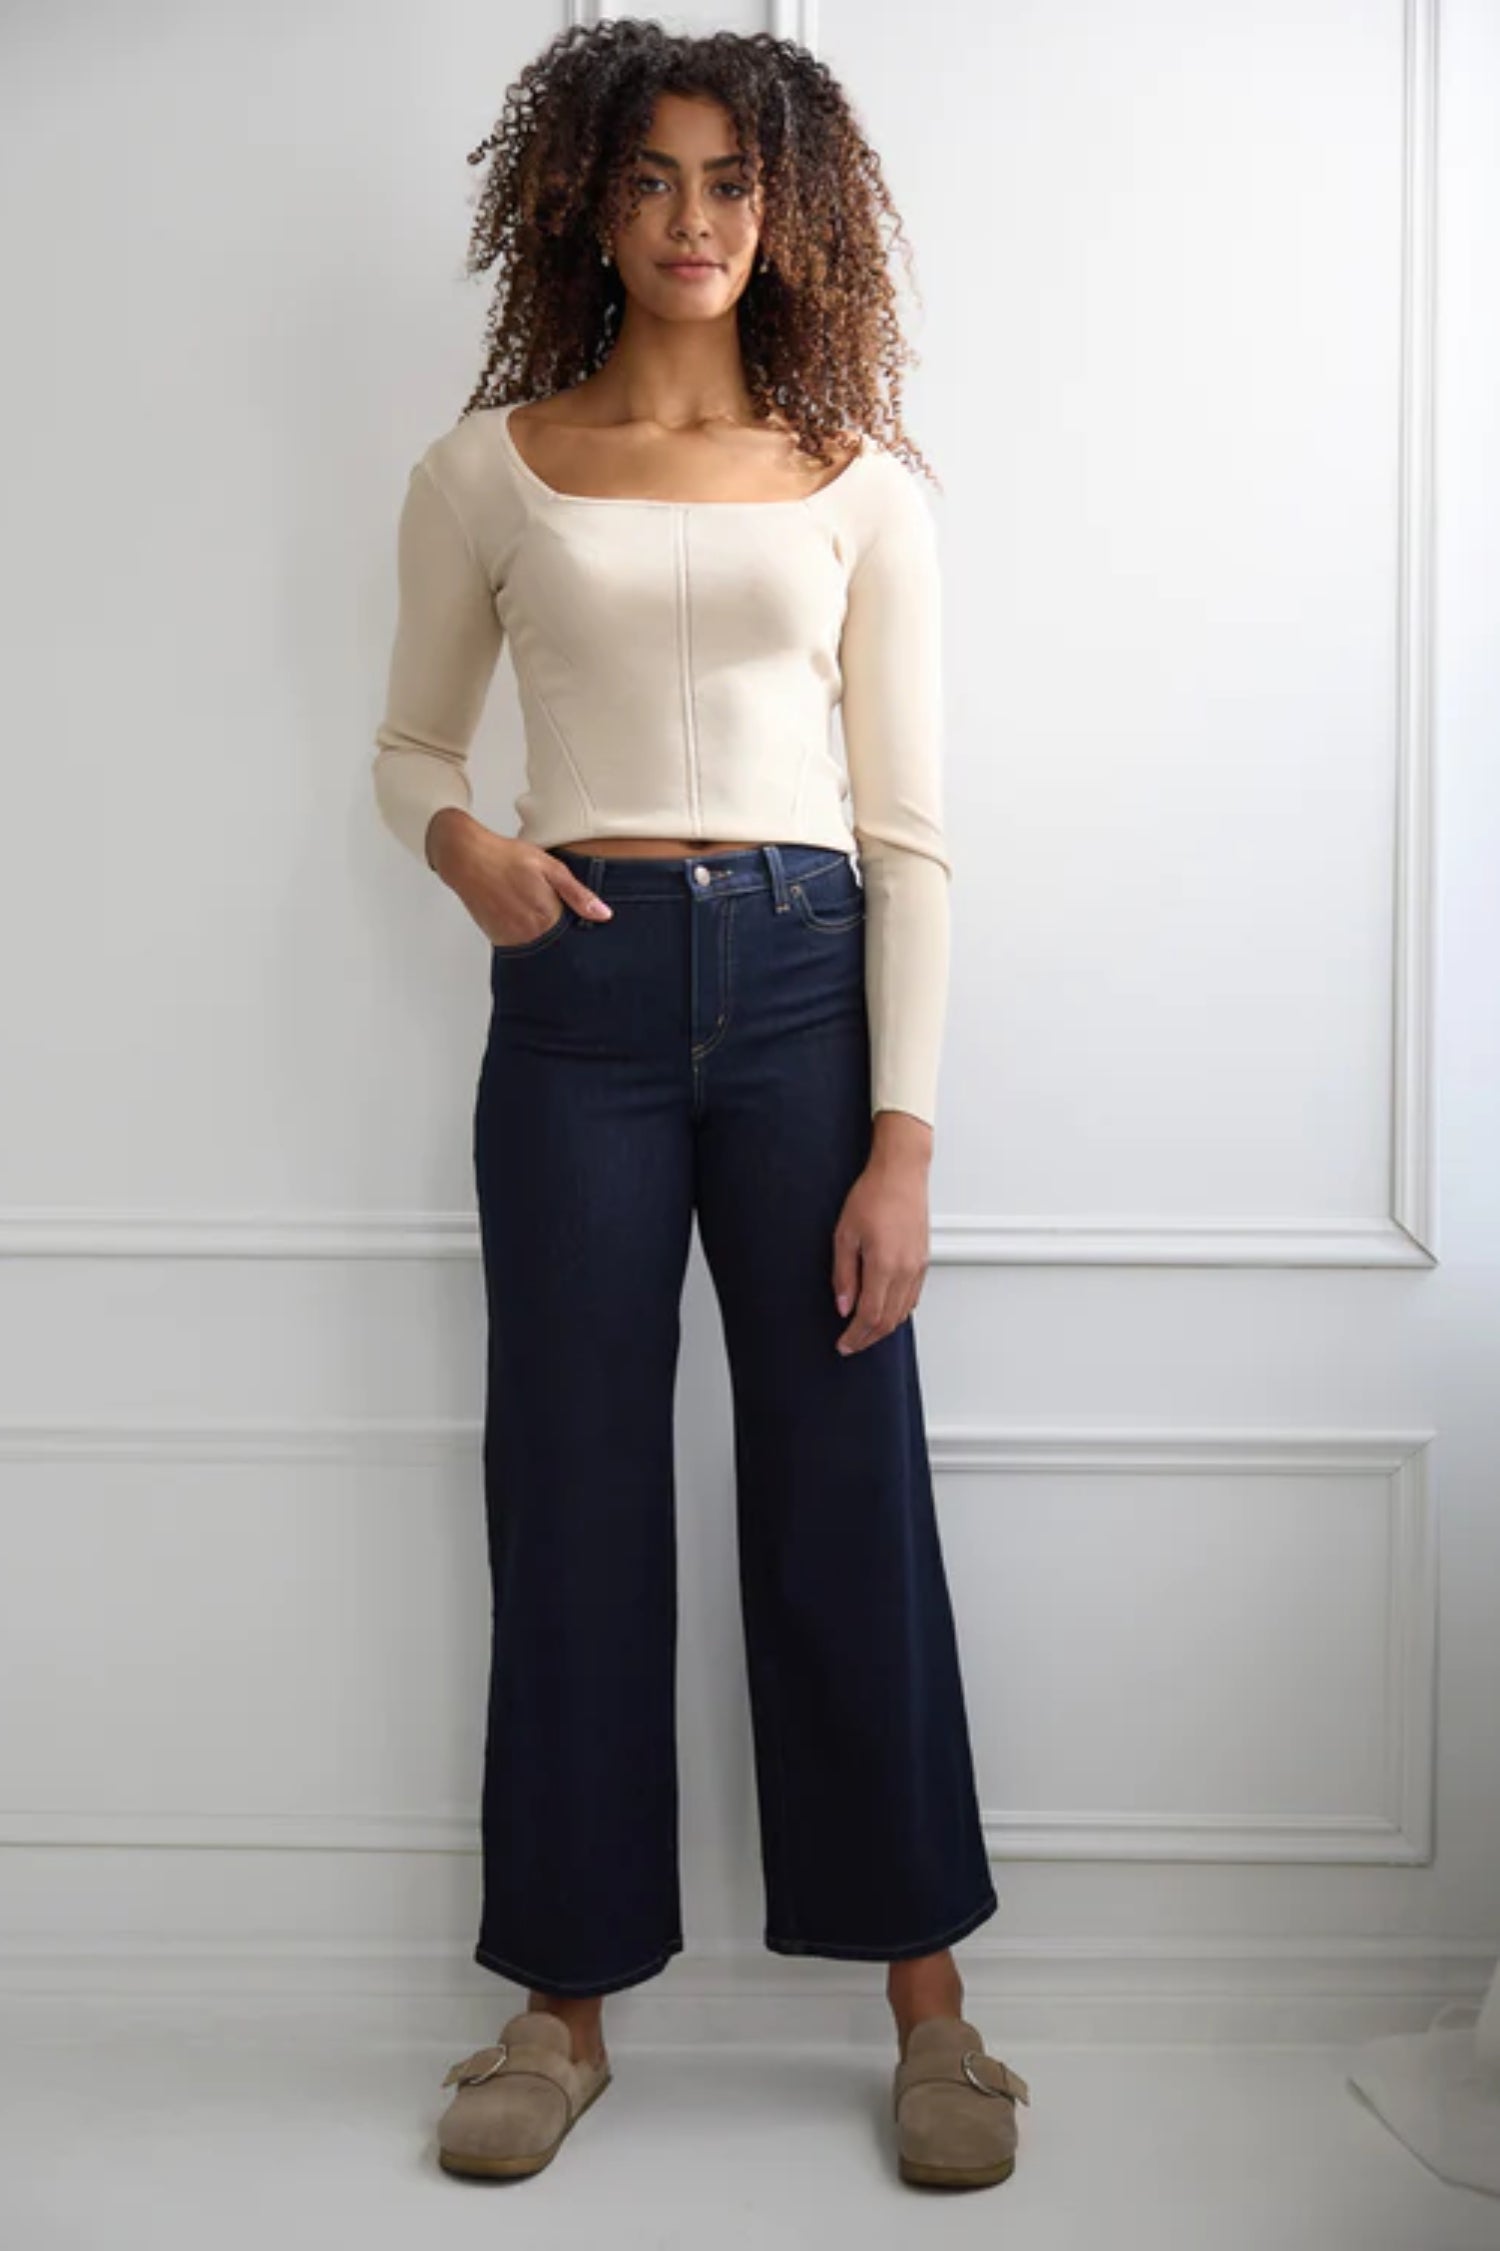 Night Cap LILY High Rise Wide Leg Yoga Jeans, high waist, 30 inch inseam, fitted waist, wide leg, travel denim, sizes 24-34, made in Canada